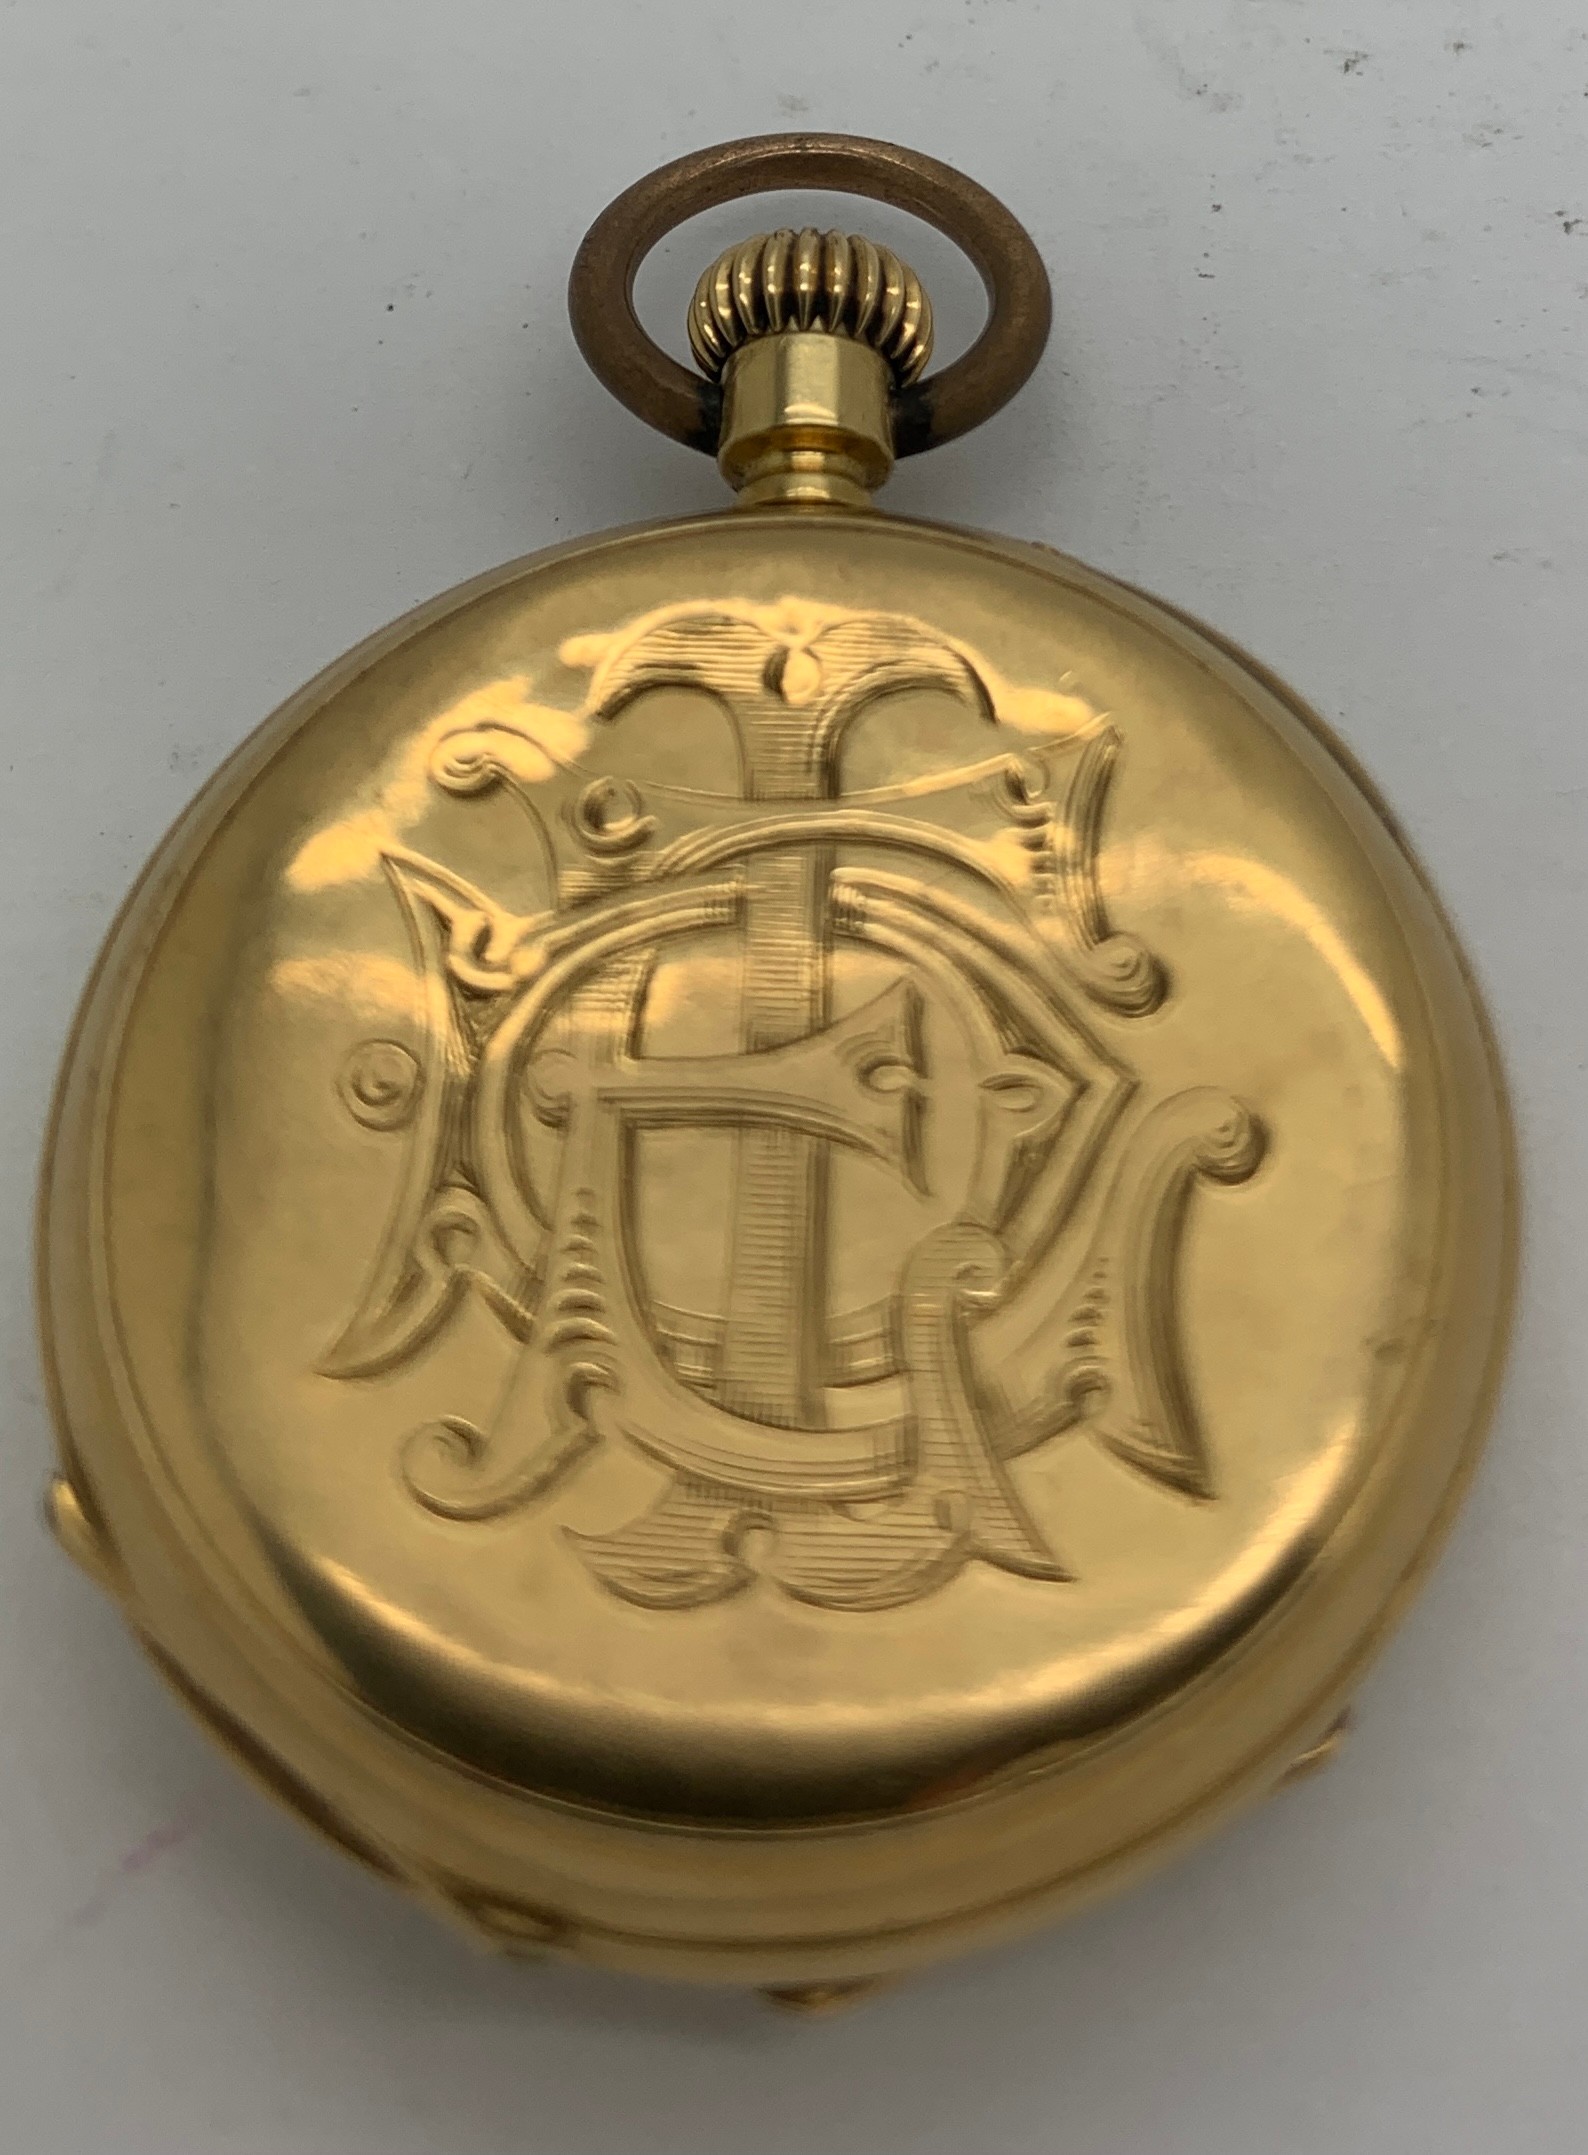 Ladies pocket watch by Henry Capt Geneve. case diameter approx. 33mms. weight 31.3gms - Image 2 of 4